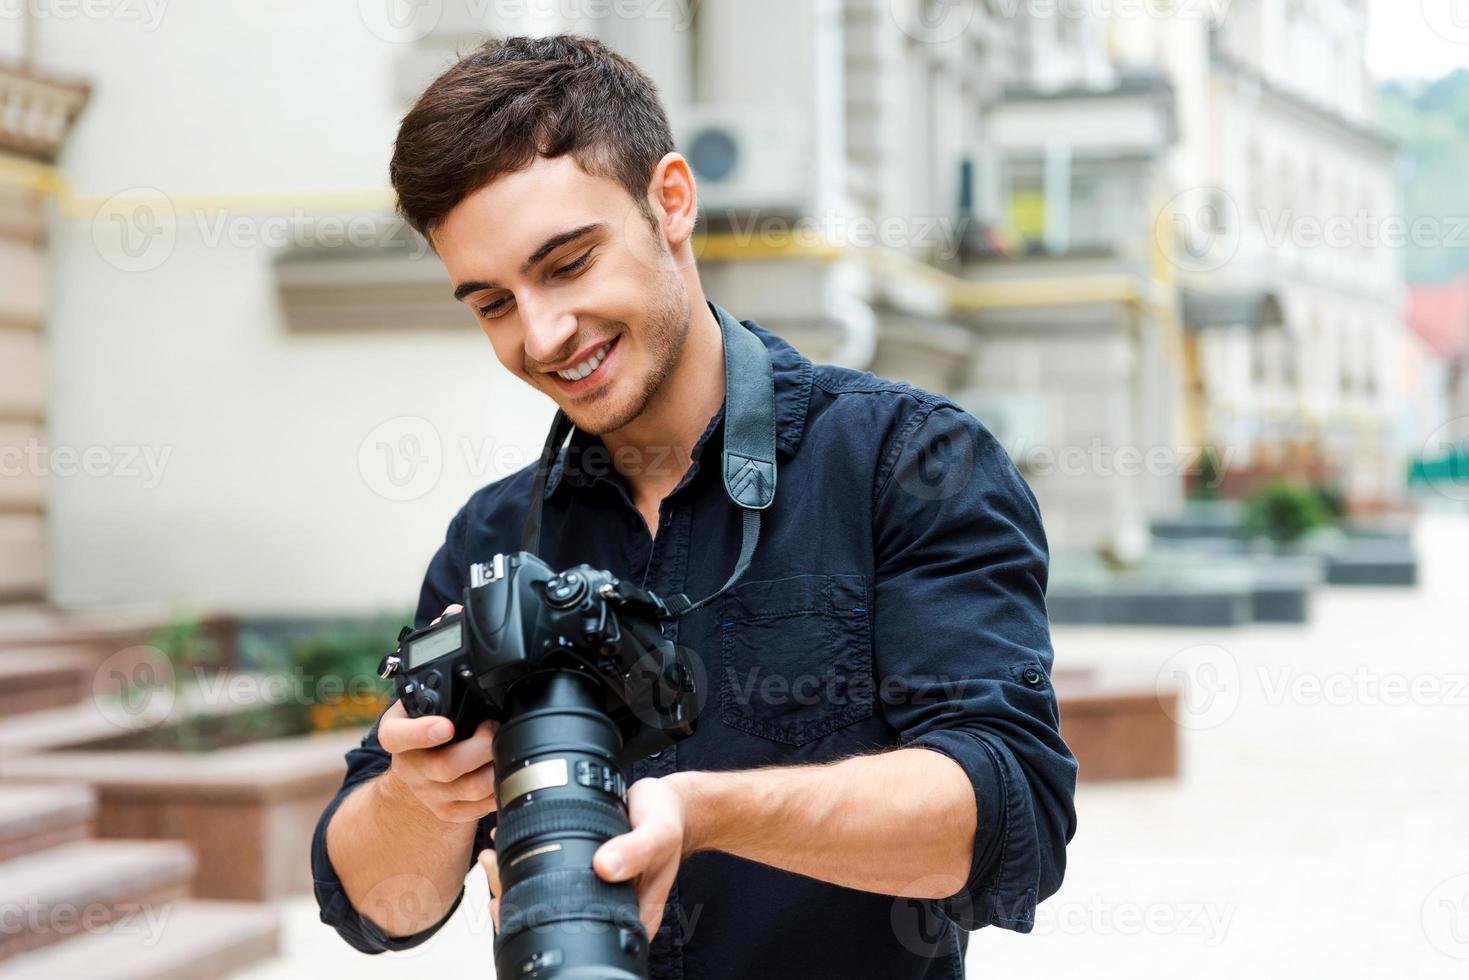 Finding the right shoot. Happy young man holding camera and smiling while standing outdoors photo